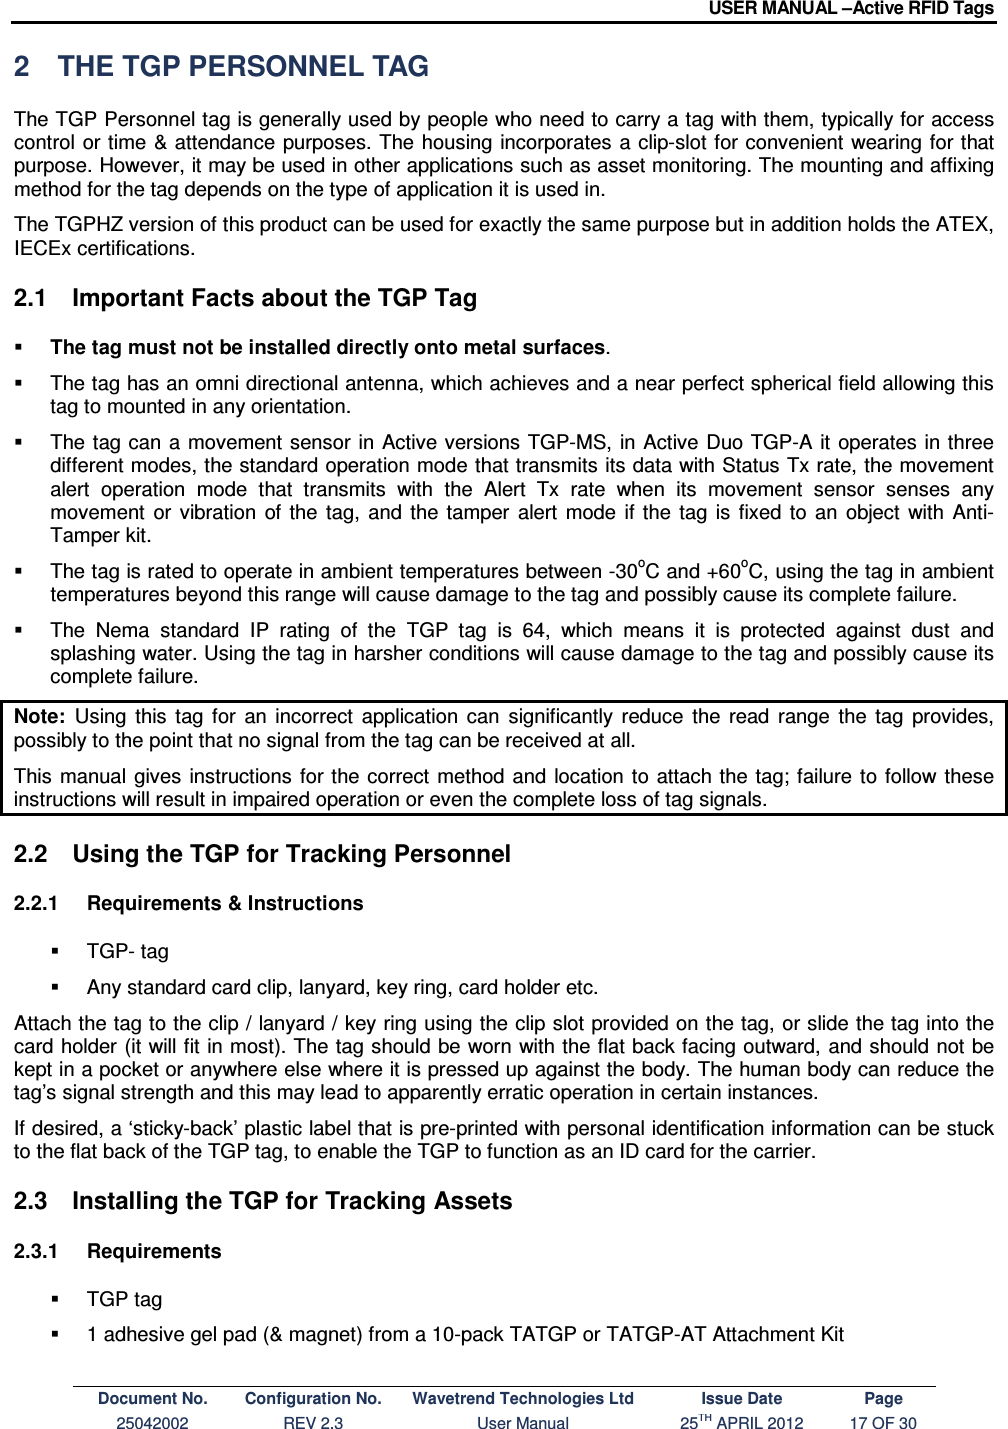 USER MANUAL –Active RFID Tags Document No. Configuration No. Wavetrend Technologies Ltd Issue Date Page 25042002  REV 2.3  User Manual  25TH APRIL 2012  17 OF 30  2  THE TGP PERSONNEL TAG The TGP Personnel tag is generally used by people who need to carry a tag with them, typically for access control  or time &amp; attendance  purposes. The housing incorporates  a clip-slot for convenient wearing for that purpose. However, it may be used in other applications such as asset monitoring. The mounting and affixing method for the tag depends on the type of application it is used in. The TGPHZ version of this product can be used for exactly the same purpose but in addition holds the ATEX, IECEx certifications.  2.1  Important Facts about the TGP Tag  The tag must not be installed directly onto metal surfaces.    The tag has an omni directional antenna, which achieves and a near perfect spherical field allowing this tag to mounted in any orientation.    The tag can  a  movement sensor  in  Active versions TGP-MS,  in Active Duo TGP-A it operates in three different modes, the standard operation mode that transmits its data with Status Tx rate, the movement alert  operation  mode  that  transmits  with  the  Alert  Tx  rate  when  its  movement  sensor  senses  any movement  or  vibration  of  the  tag,  and  the  tamper  alert  mode  if  the  tag  is  fixed  to  an  object  with  Anti-Tamper kit.   The tag is rated to operate in ambient temperatures between -30oC and +60oC, using the tag in ambient temperatures beyond this range will cause damage to the tag and possibly cause its complete failure.   The  Nema  standard  IP  rating  of  the  TGP  tag  is  64,  which  means  it  is  protected  against  dust  and splashing water. Using the tag in harsher conditions will cause damage to the tag and possibly cause its complete failure. Note:  Using  this  tag  for  an  incorrect  application  can  significantly  reduce  the  read  range  the  tag  provides, possibly to the point that no signal from the tag can be received at all. This  manual  gives  instructions  for the correct method  and  location to  attach the tag; failure to  follow these instructions will result in impaired operation or even the complete loss of tag signals.  2.2  Using the TGP for Tracking Personnel 2.2.1  Requirements &amp; Instructions   TGP- tag   Any standard card clip, lanyard, key ring, card holder etc. Attach the tag to the clip / lanyard / key ring using the clip slot provided on the tag, or slide the tag into the card holder (it will fit in most). The tag should be worn with the flat back facing outward, and should not be kept in a pocket or anywhere else where it is pressed up against the body. The human body can reduce the tag’s signal strength and this may lead to apparently erratic operation in certain instances. If desired, a ‘sticky-back’ plastic label that is pre-printed with personal identification information can be stuck to the flat back of the TGP tag, to enable the TGP to function as an ID card for the carrier. 2.3  Installing the TGP for Tracking Assets 2.3.1  Requirements   TGP tag   1 adhesive gel pad (&amp; magnet) from a 10-pack TATGP or TATGP-AT Attachment Kit  